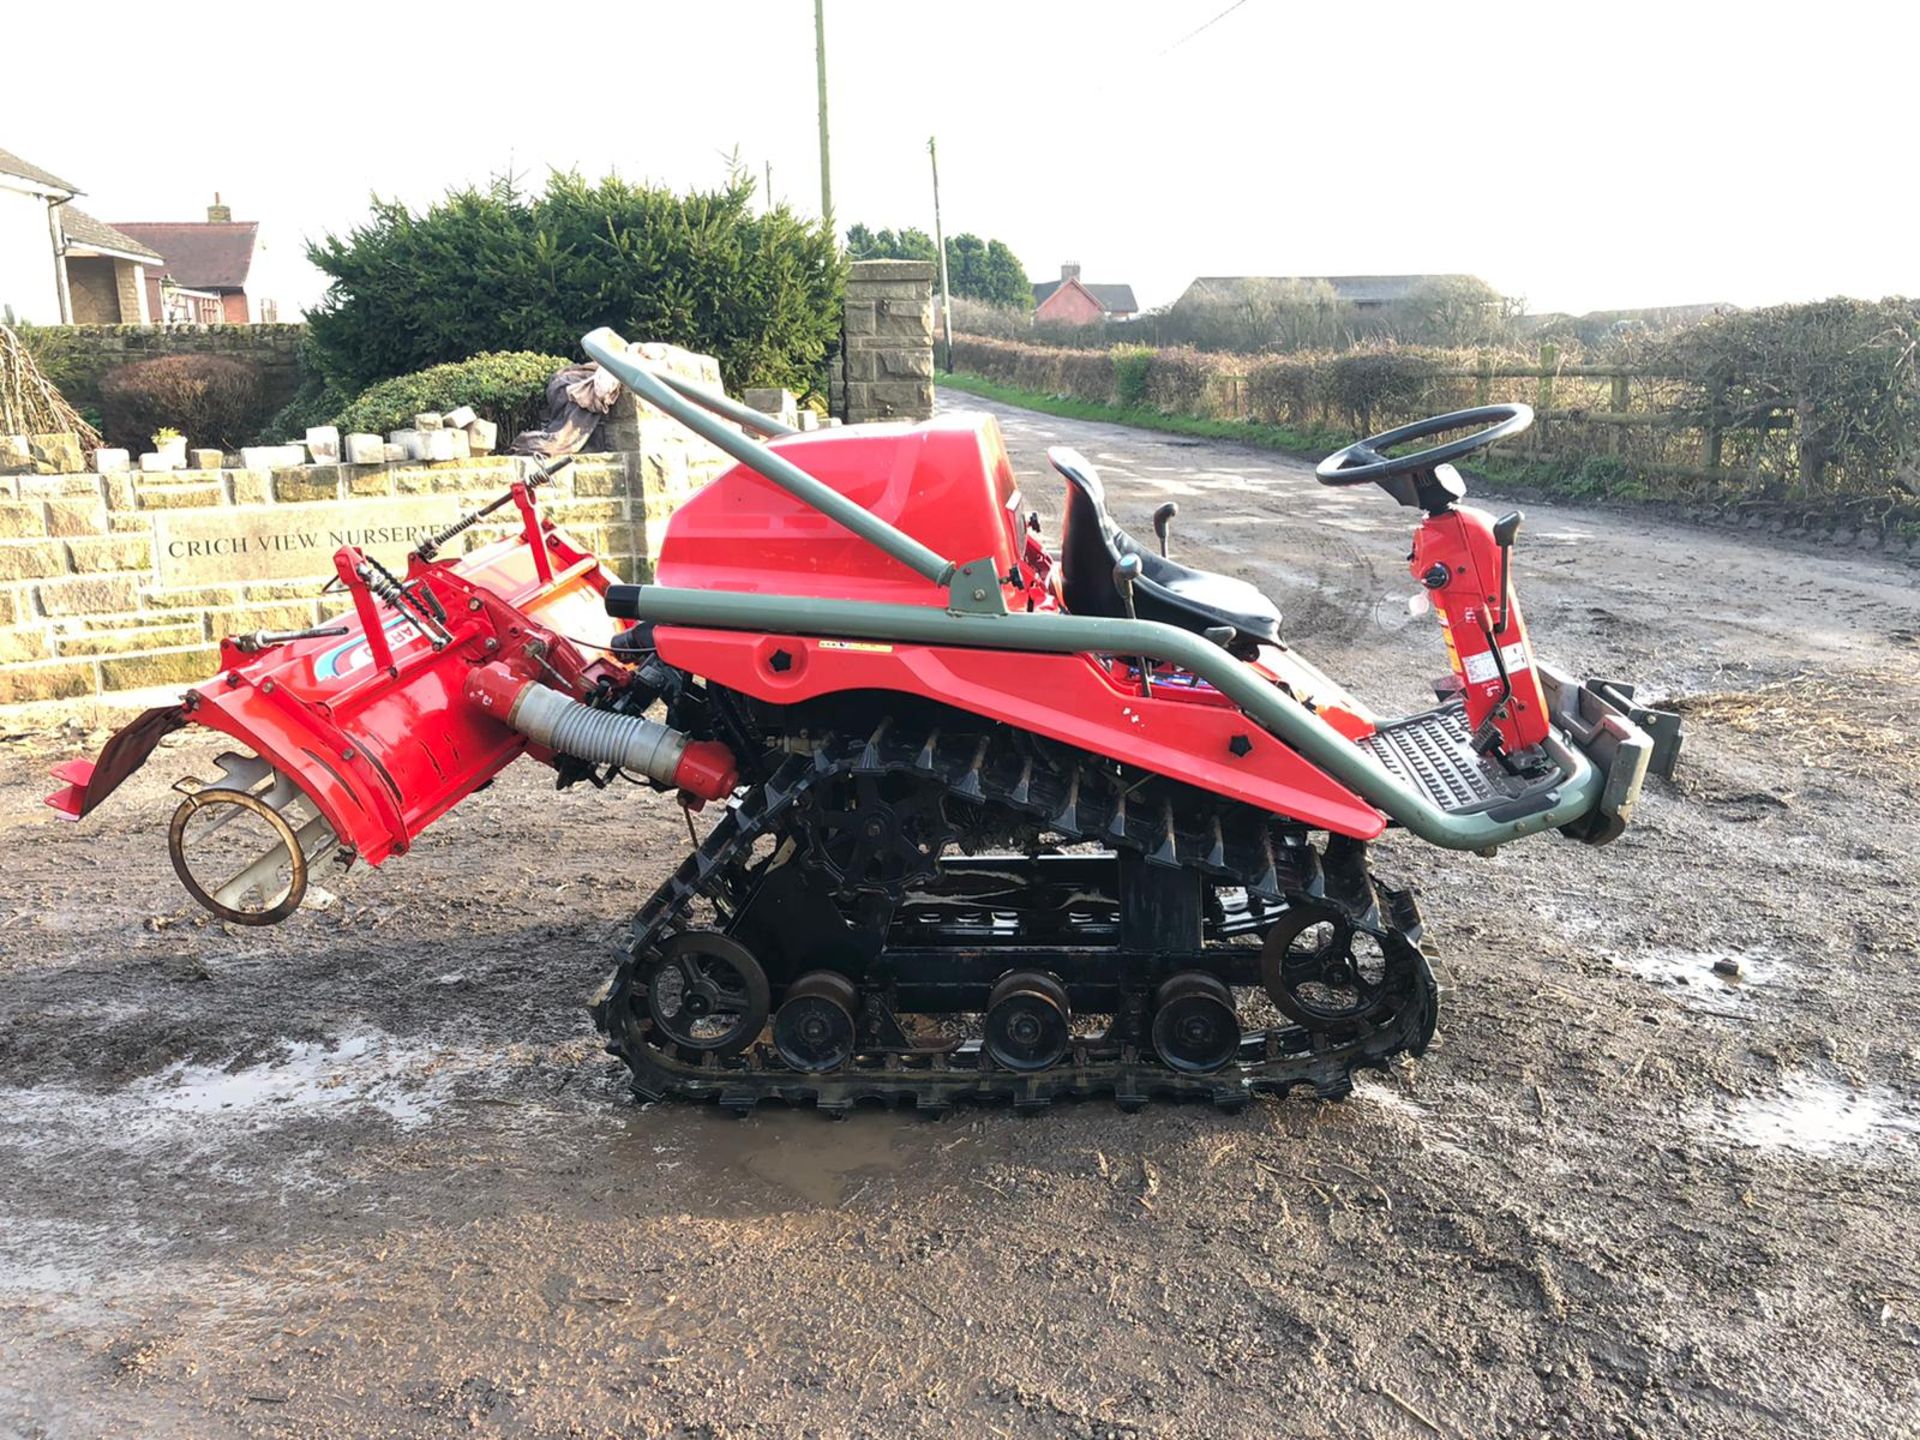 YANMAR AC10D COMPACT TRACTOR ON TRACKS, C/W ATTACHMENT ON THE BACK, RUNS AND WORKS *PLUS VAT*